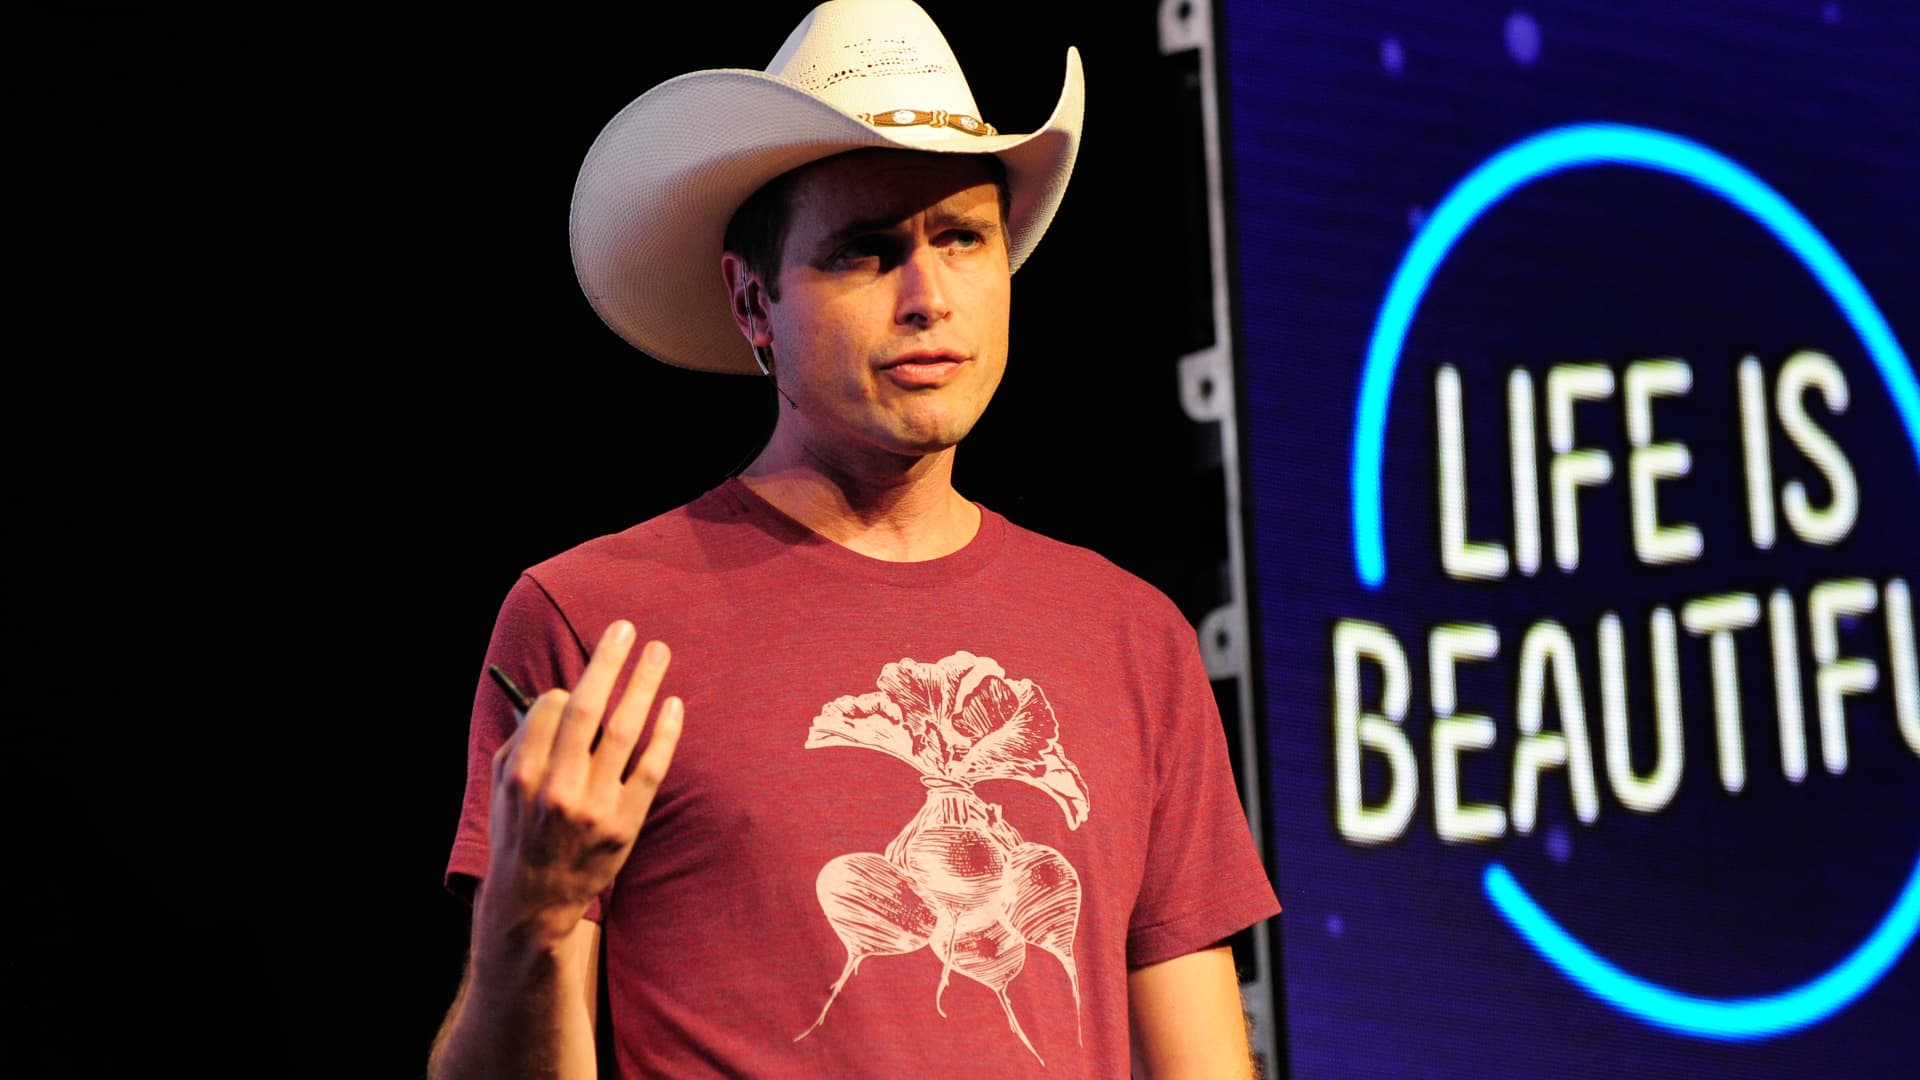 Entreprenuer Kimbal Musk speaks onstage during day 2 of the 2015 Life is Beautiful festival on September 26, 2015 in Las Vegas, Nevada. 